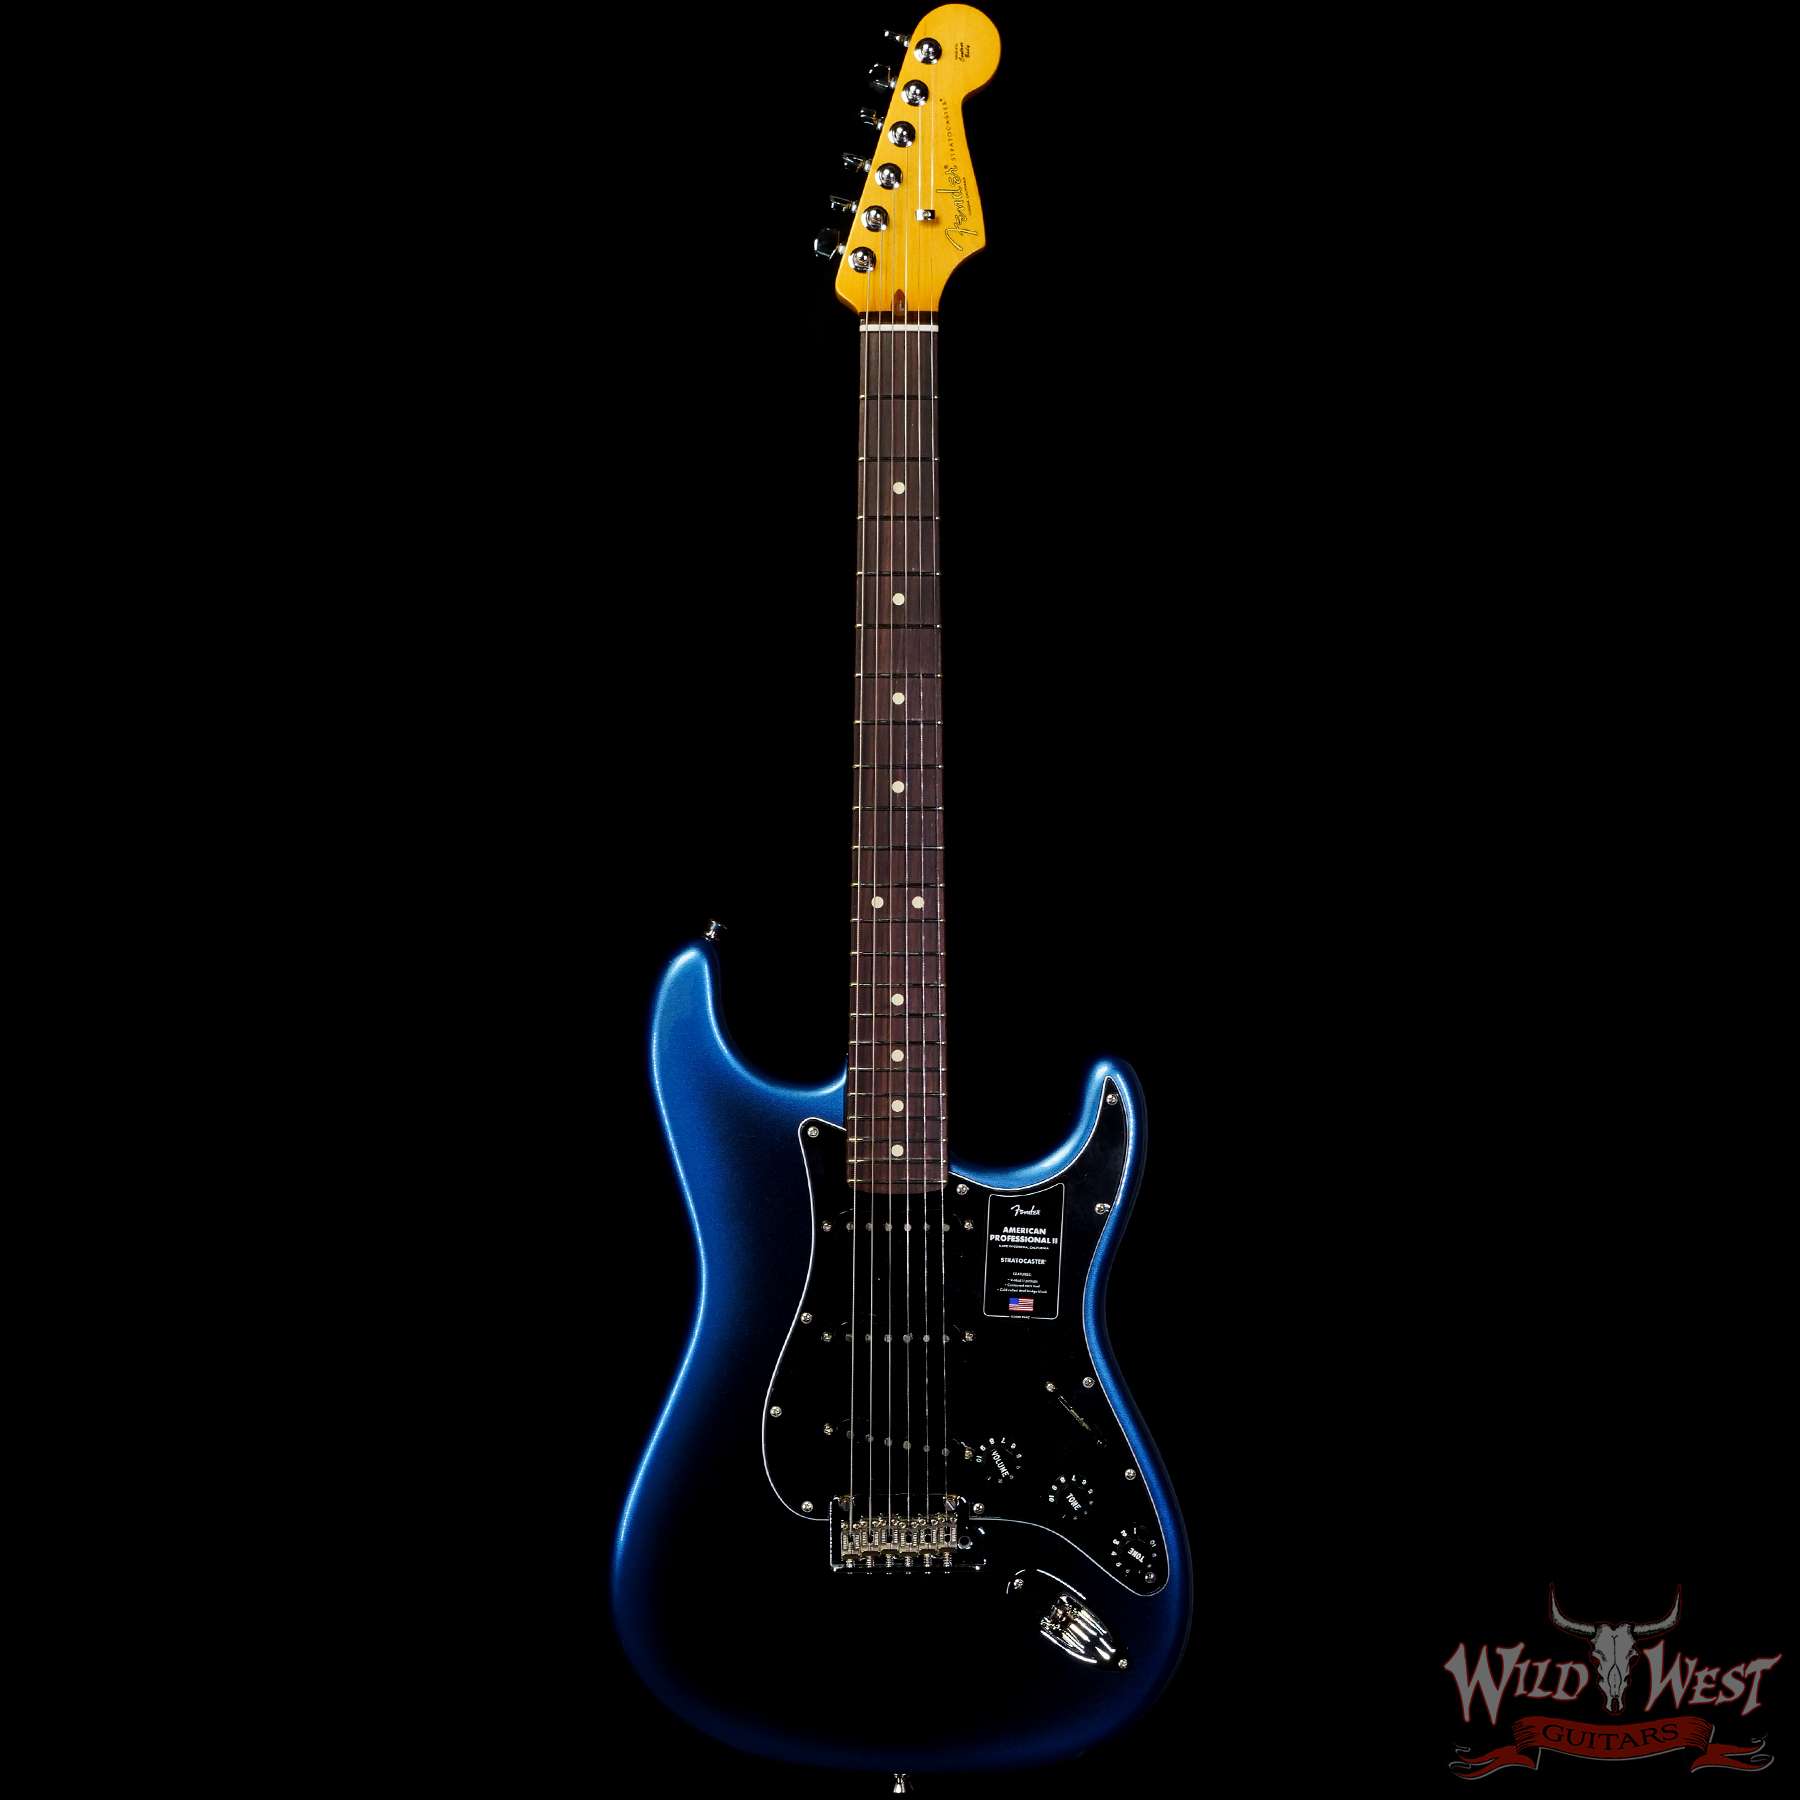 FENDER Fender USA American Professional II Stratocaster Left-Hand -Miami  Blue Rosewood-【US20044046】【3.69kg】《エレキギター》